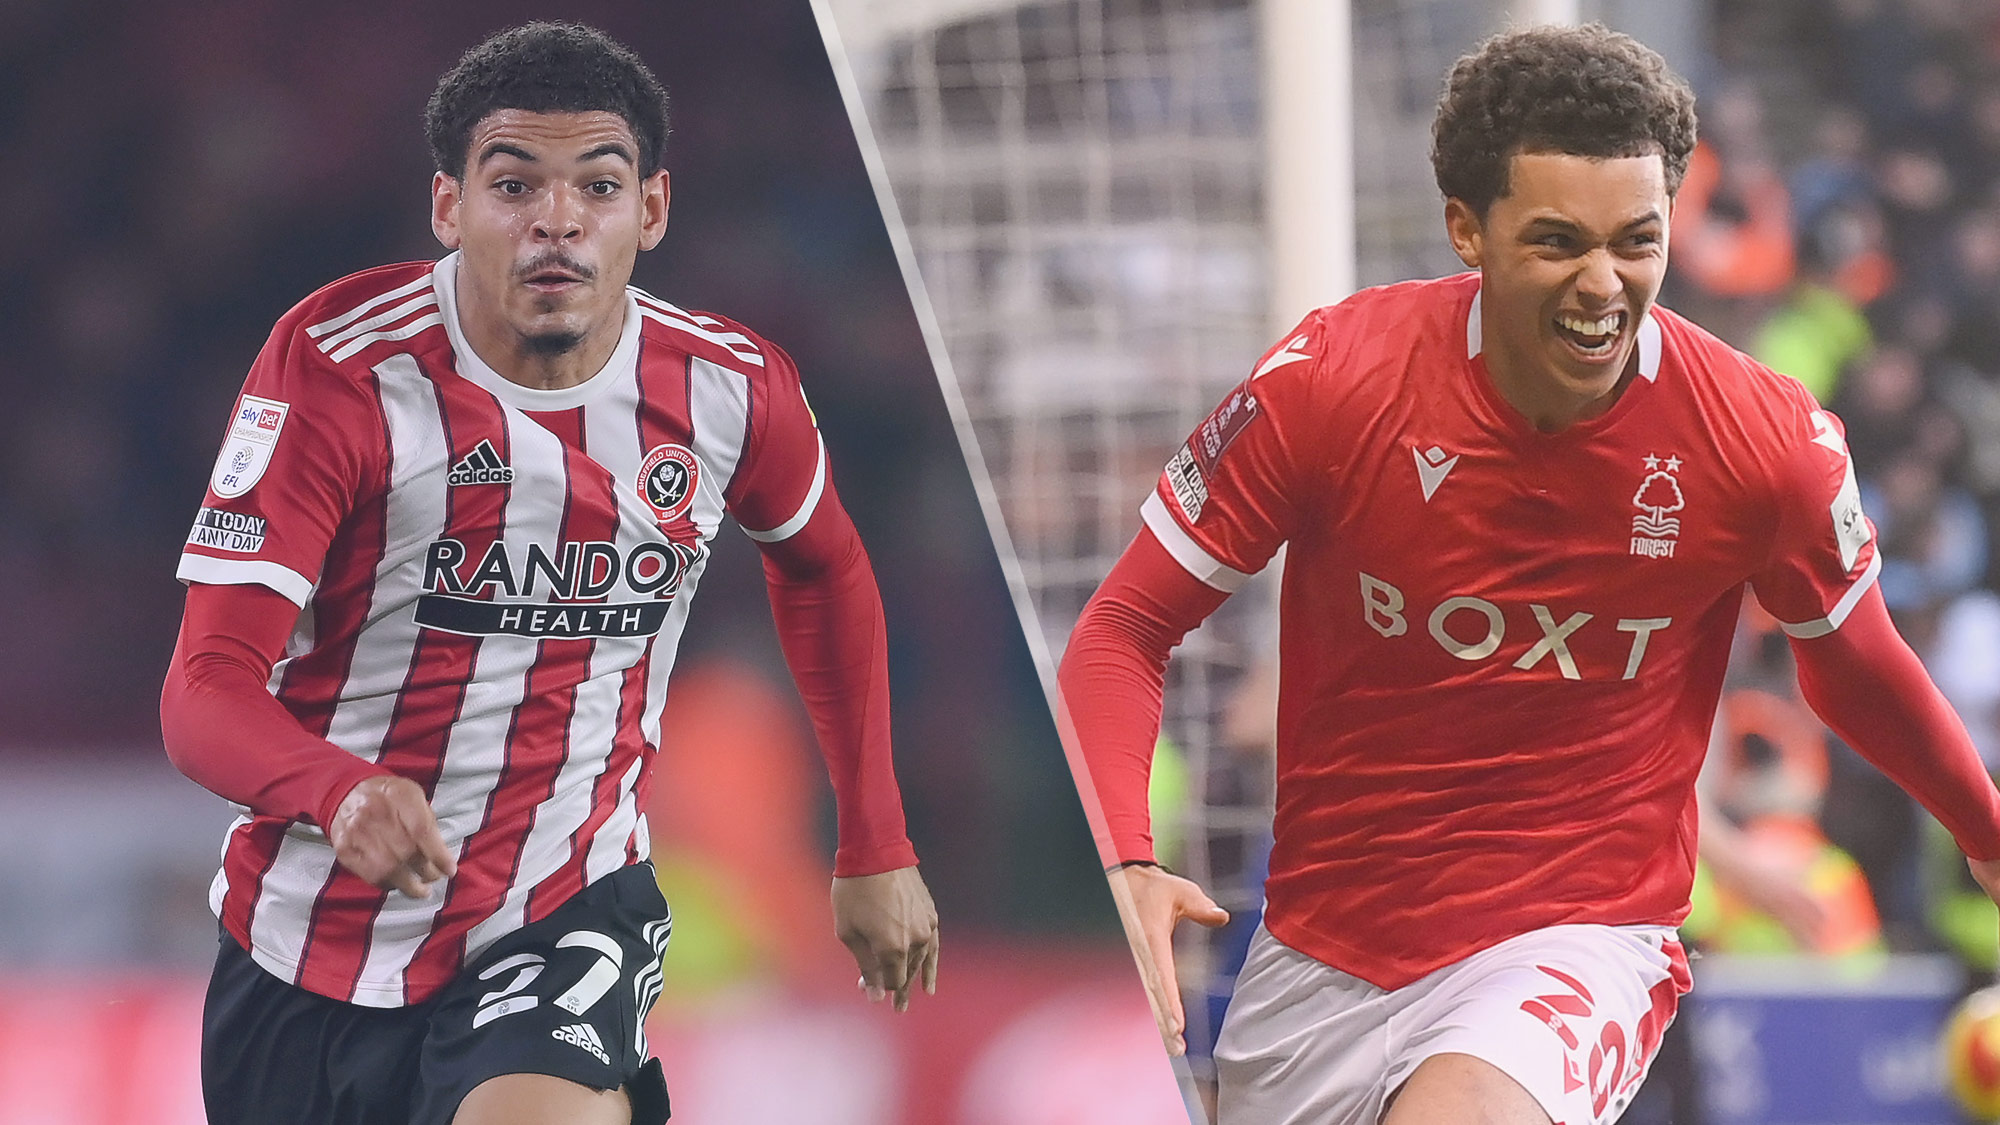 Sheffield United vs Nottingham Forest live stream — how to watch Championship play-off semi-final online